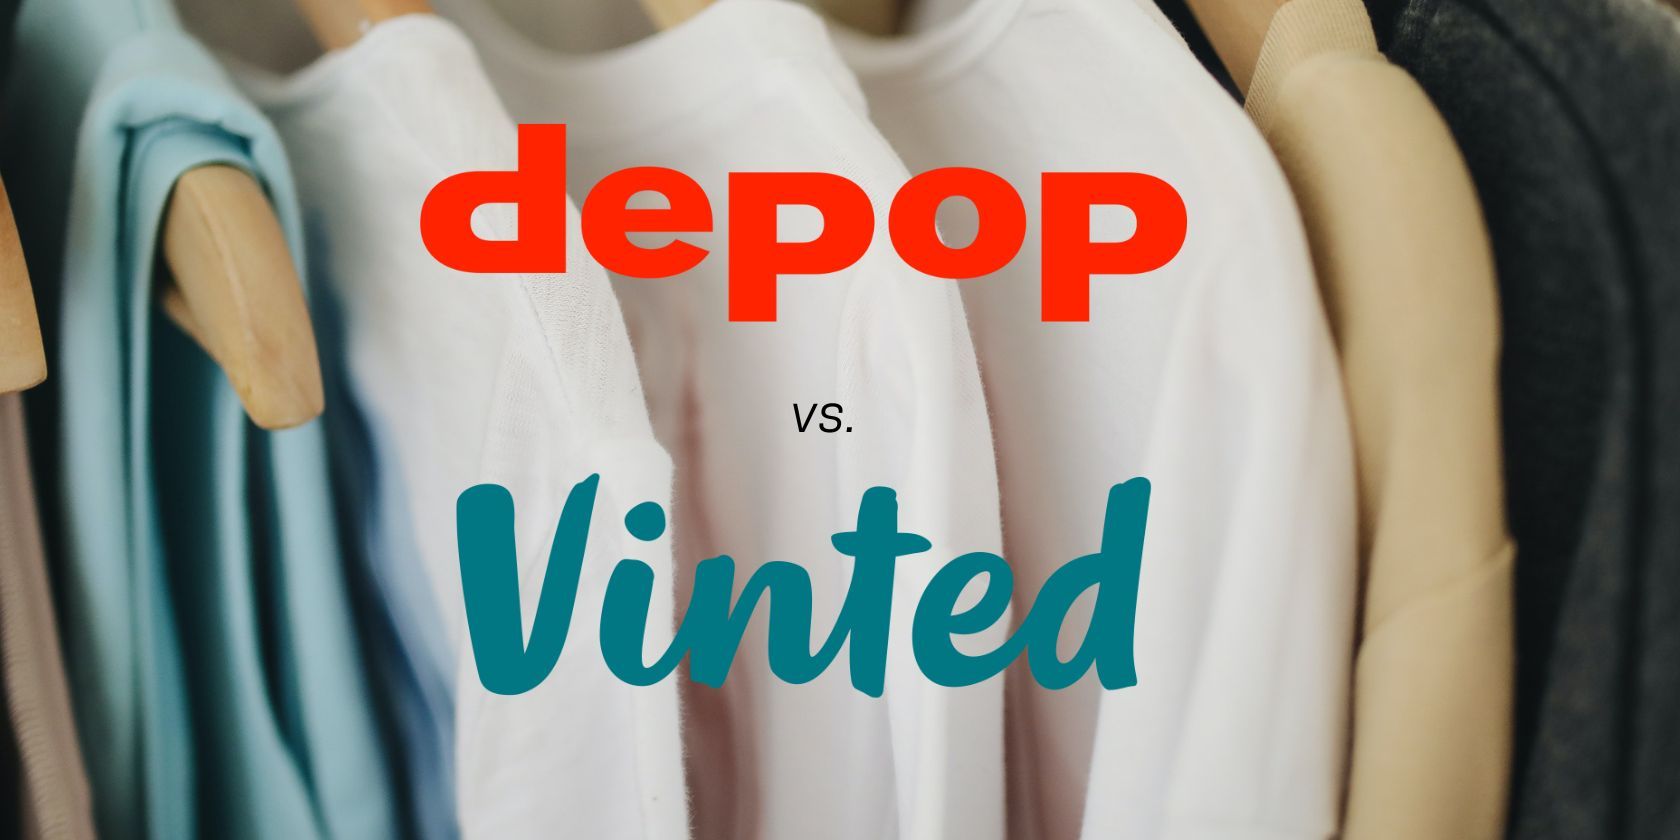 depop and vinted logos in front of clothes on rack